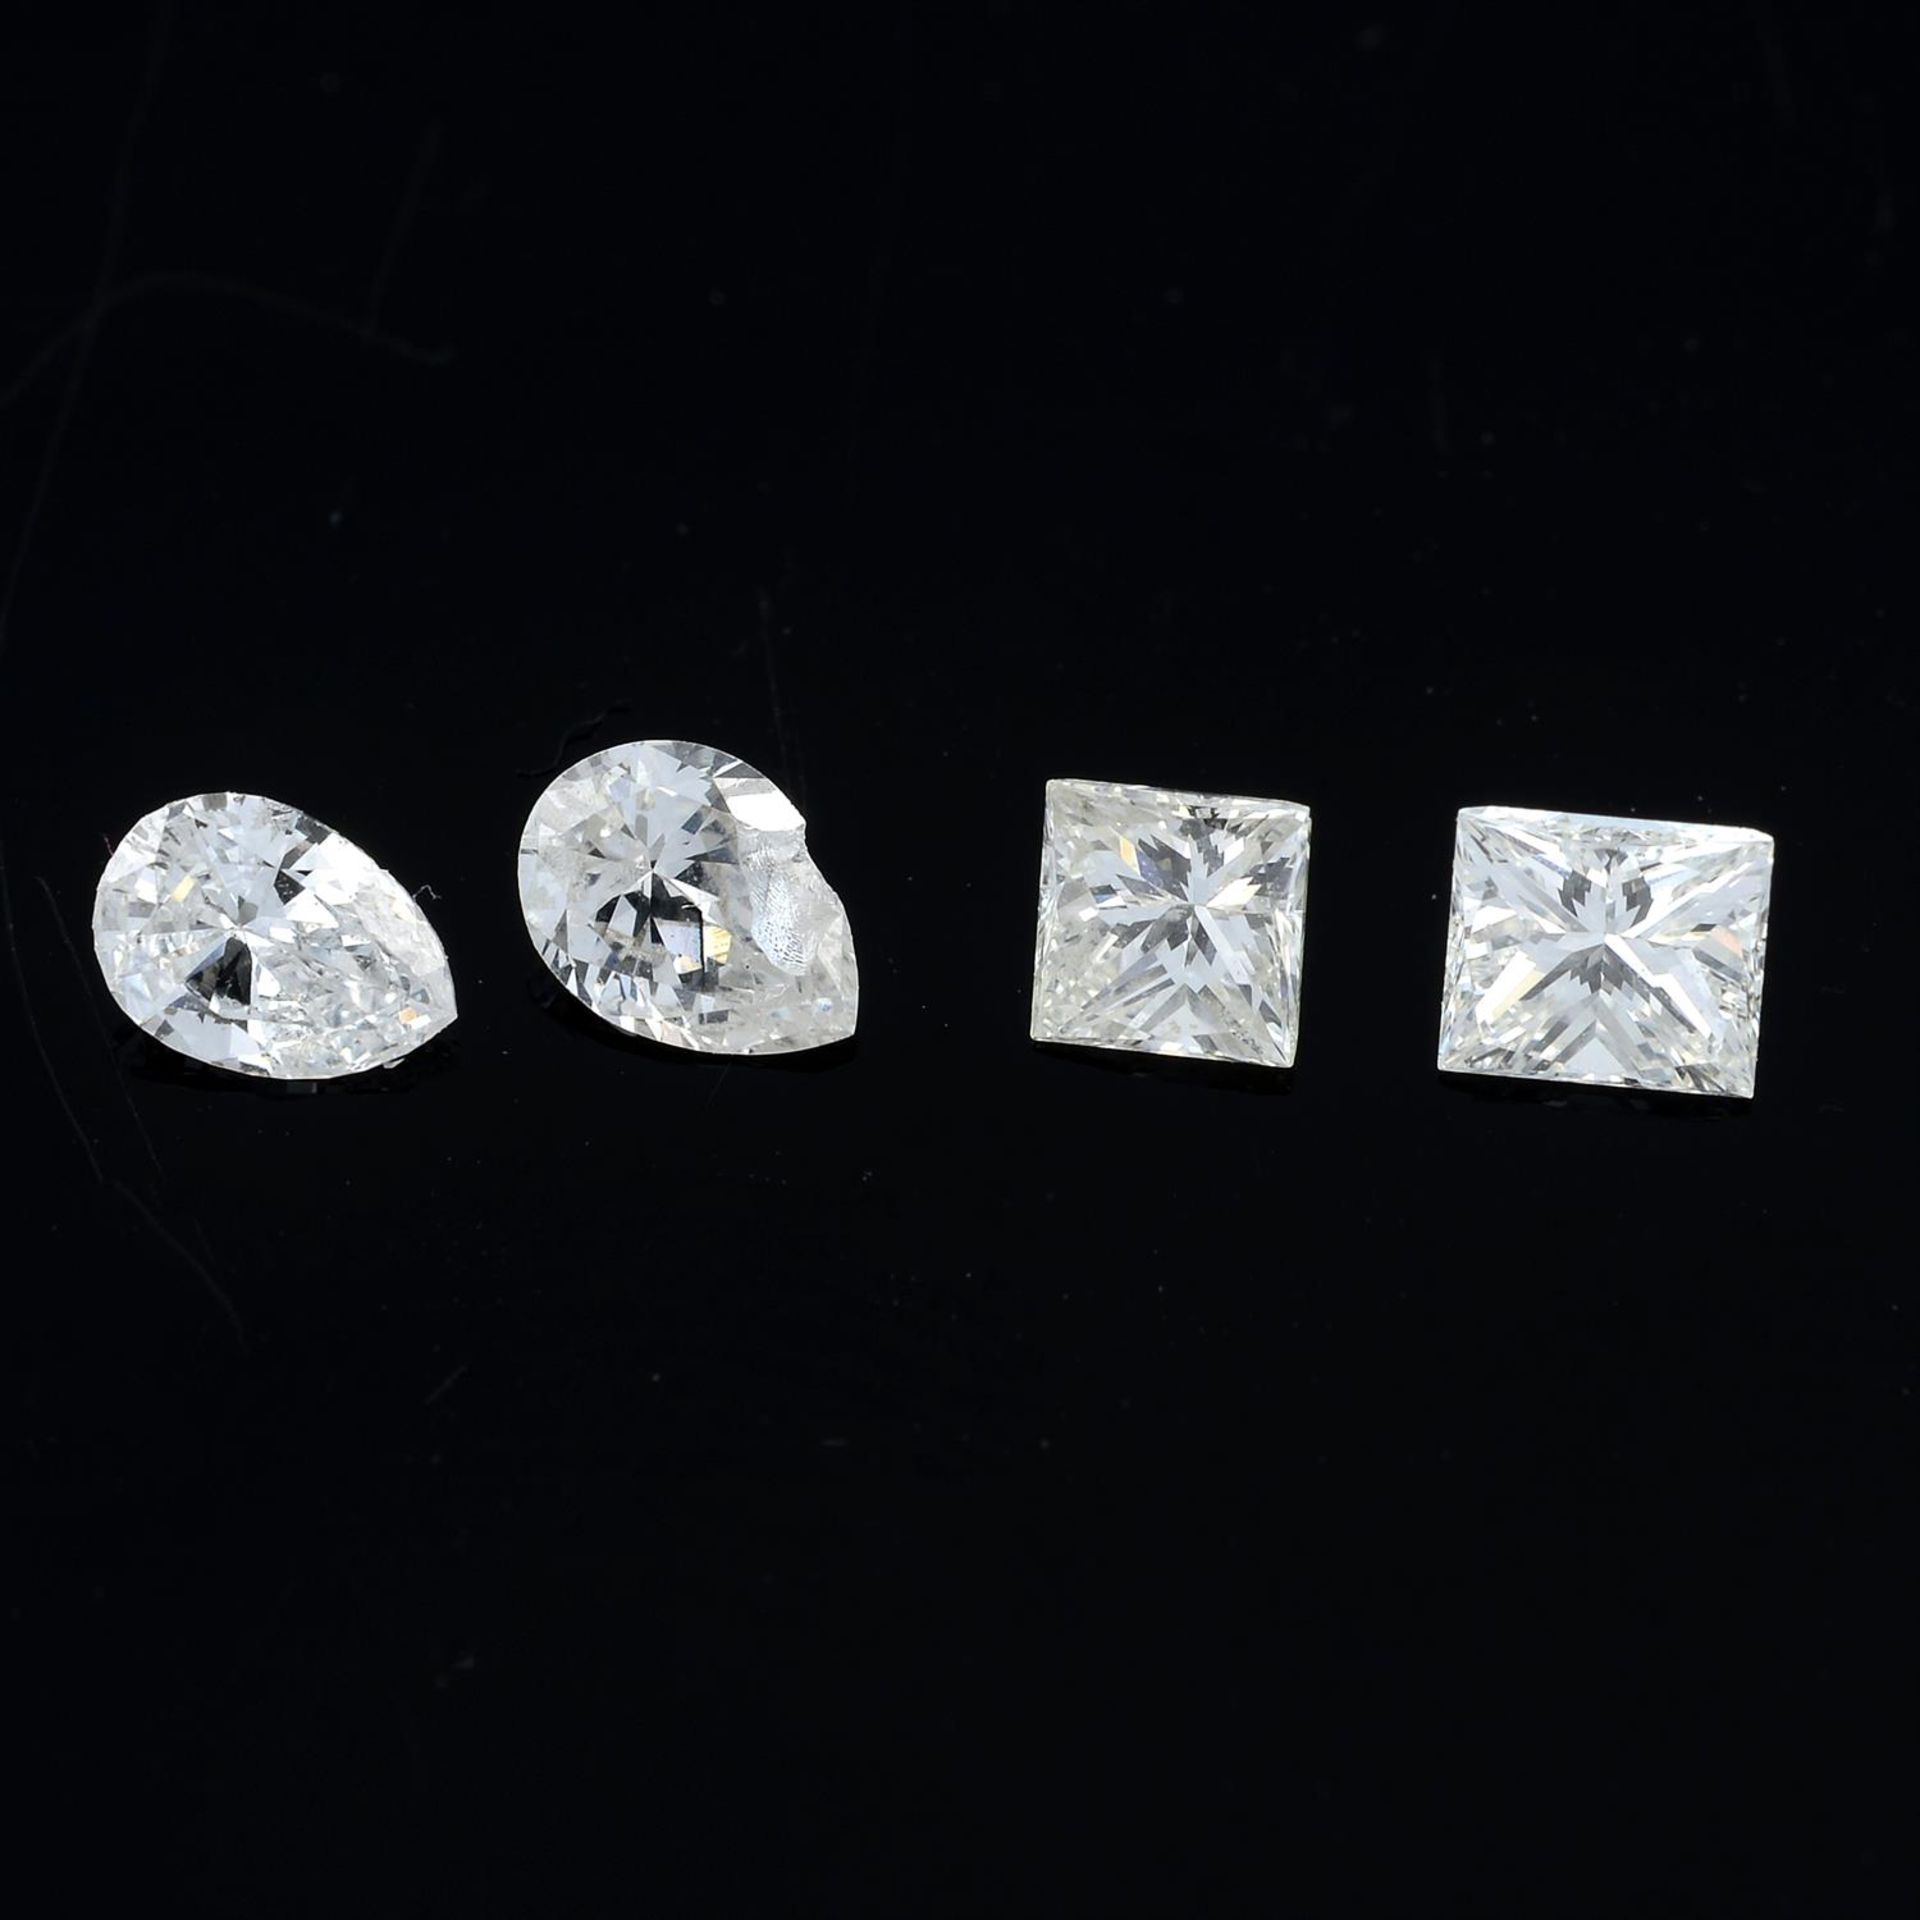 Four fancy-cut diamonds, total weight 0.68cts.